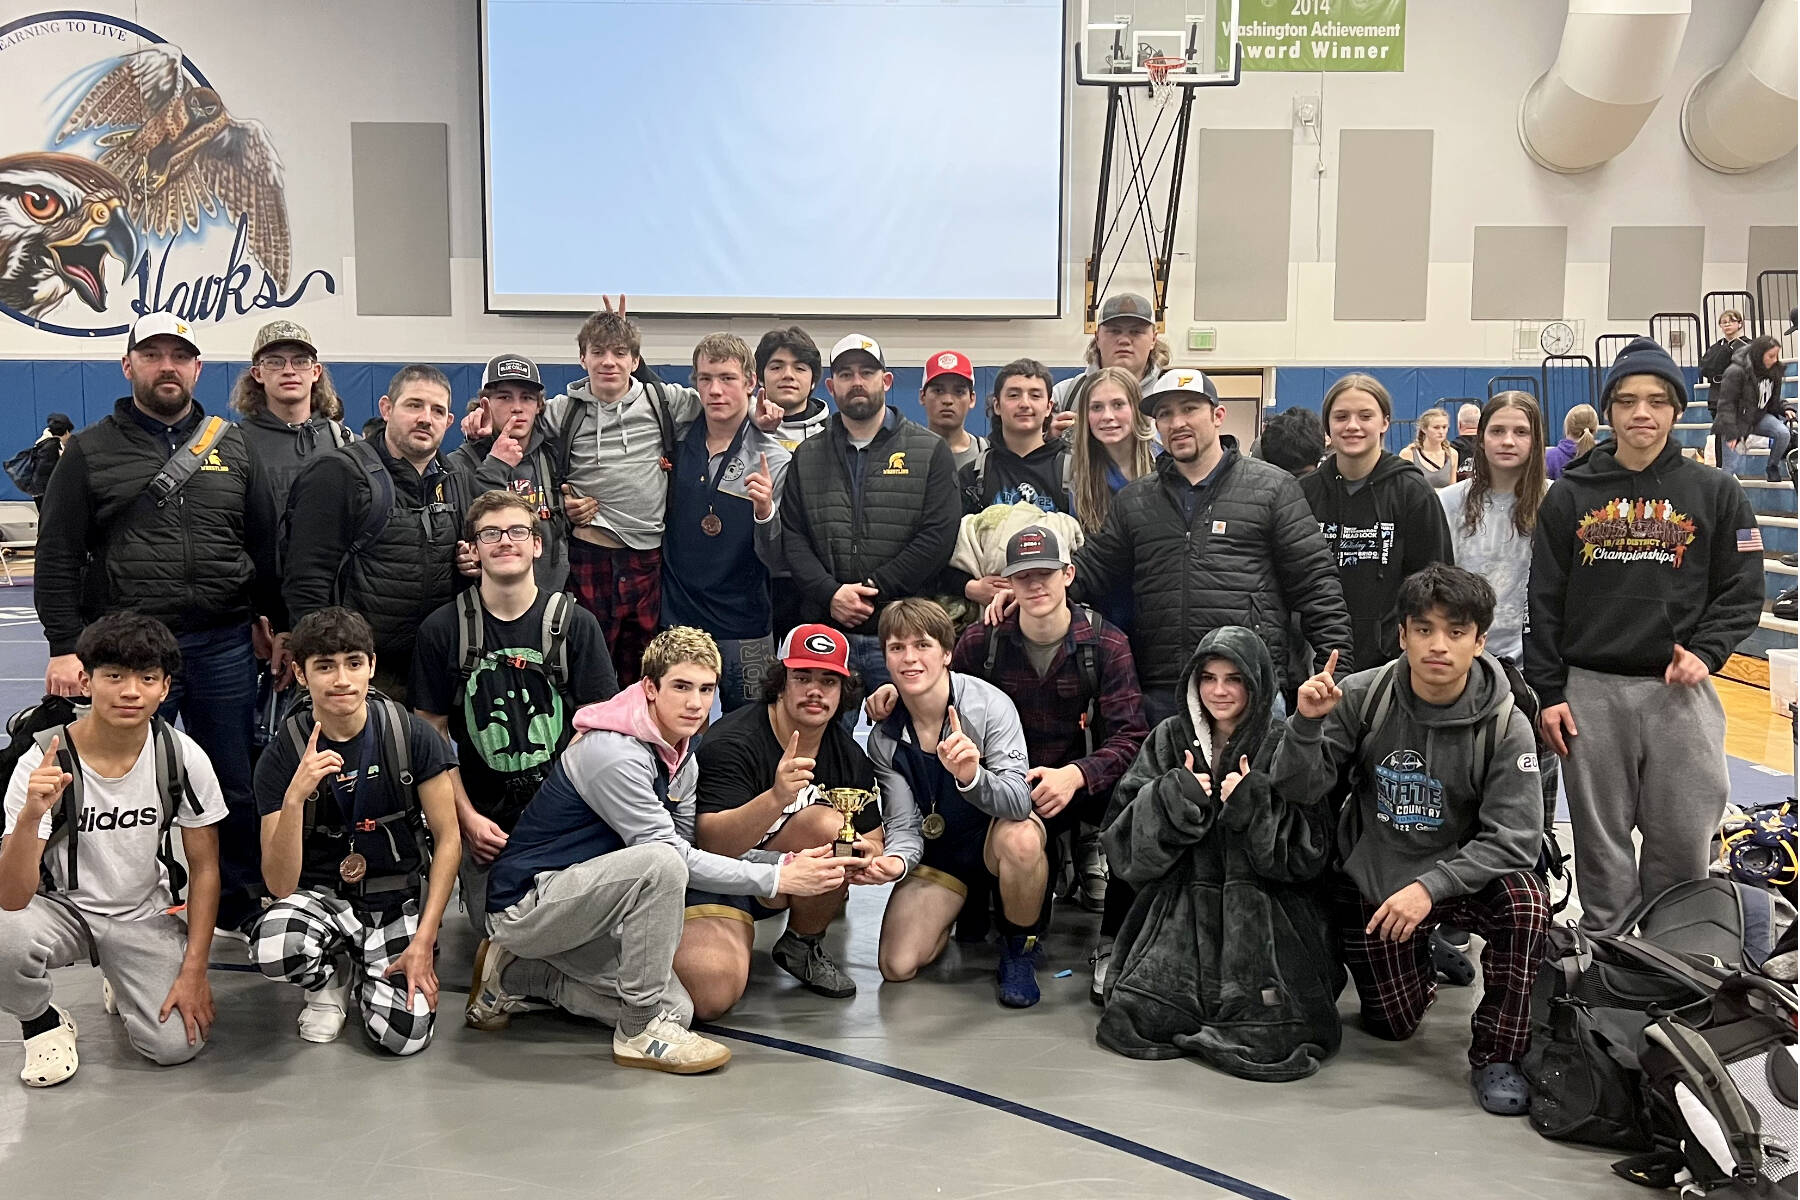 Courtesy of Forks wrestling
The Forks wrestling team celebrates the boys' seventh tournament victory this season at the River Ridge Rumble in Lacey this weekend. The Spartans beat out mostly 3A and 4A schools to win this tournament.